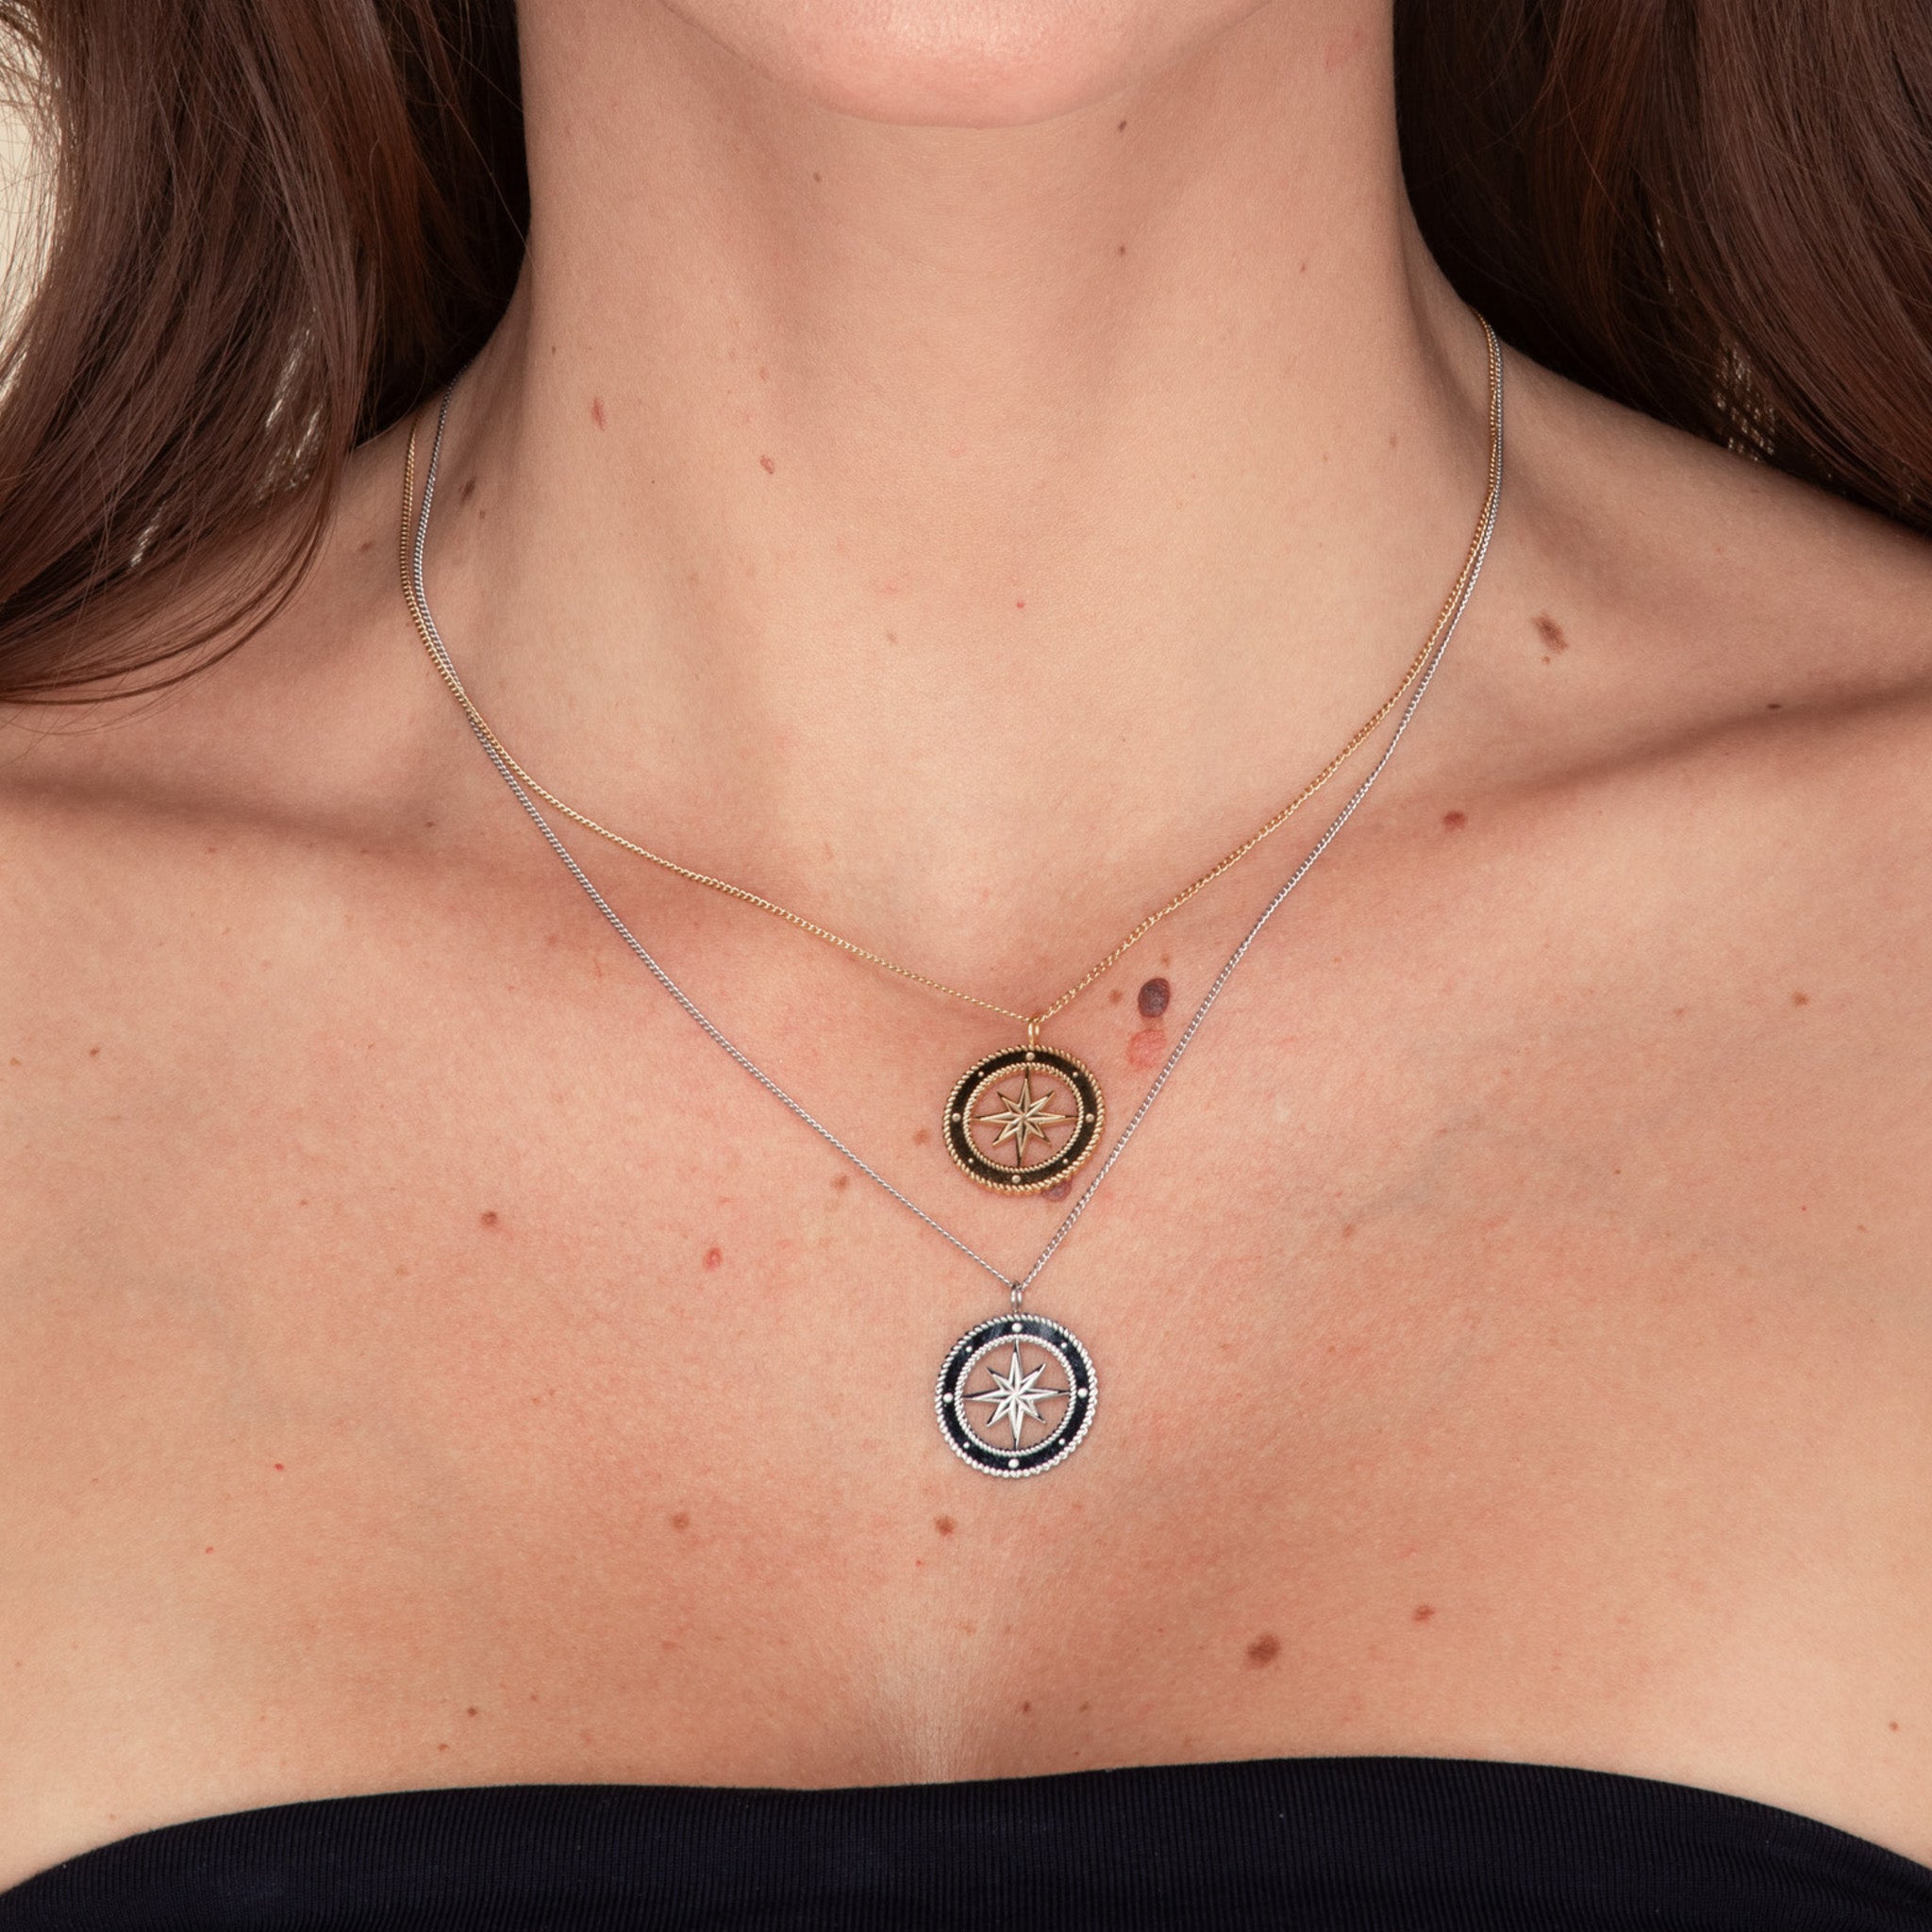 North Star Compass Necklace